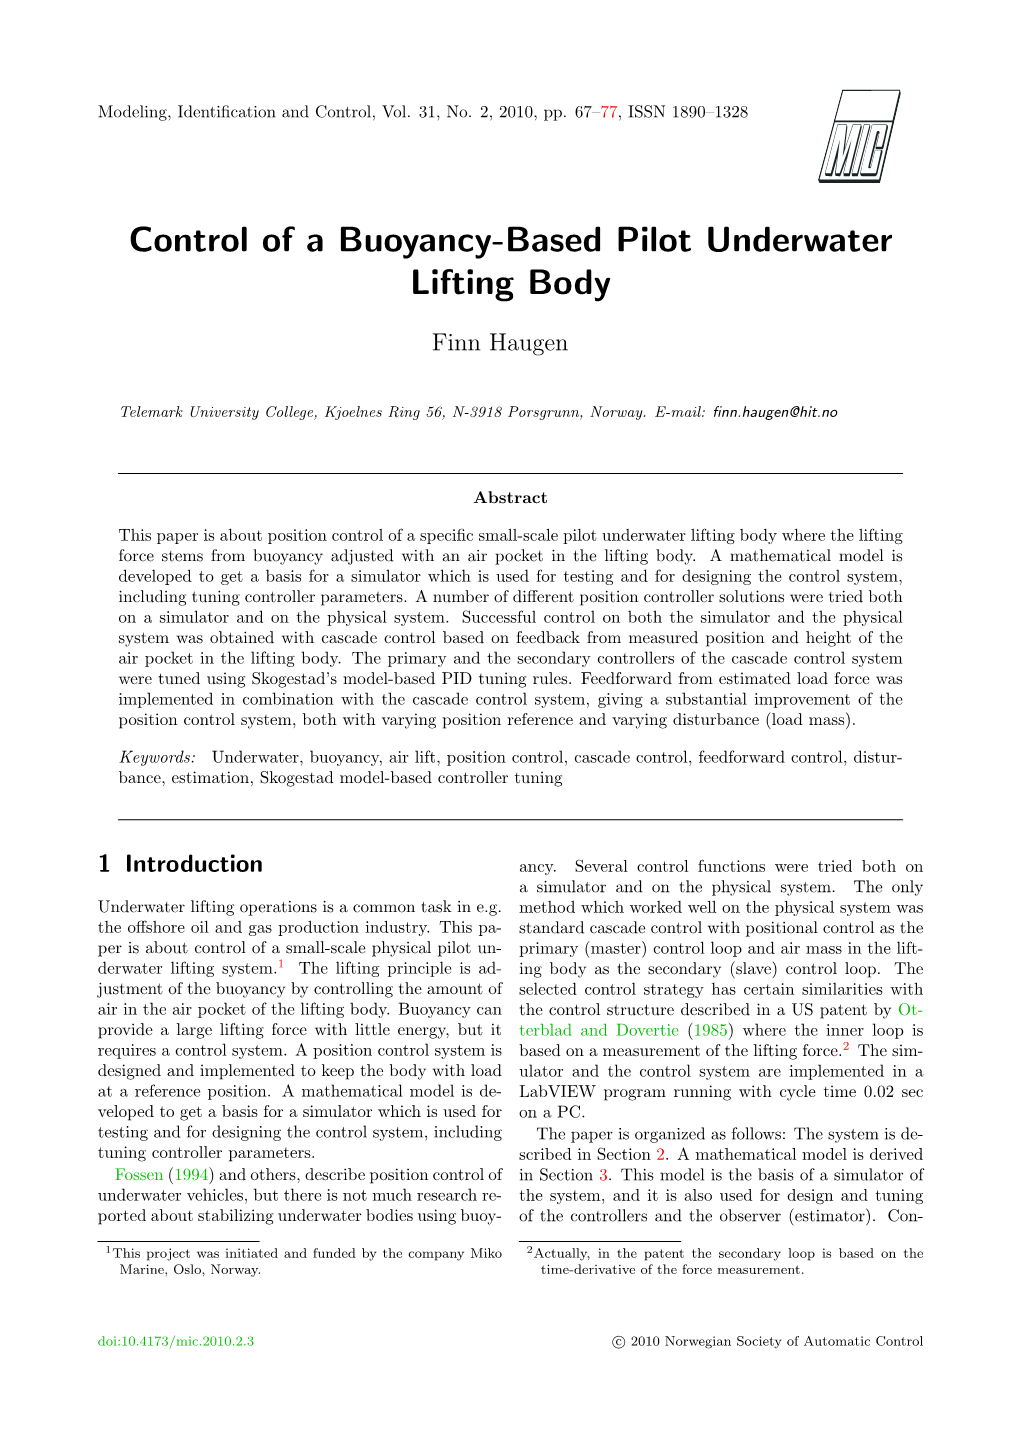 Control of a Buoyancy-Based Pilot Underwater Lifting Body